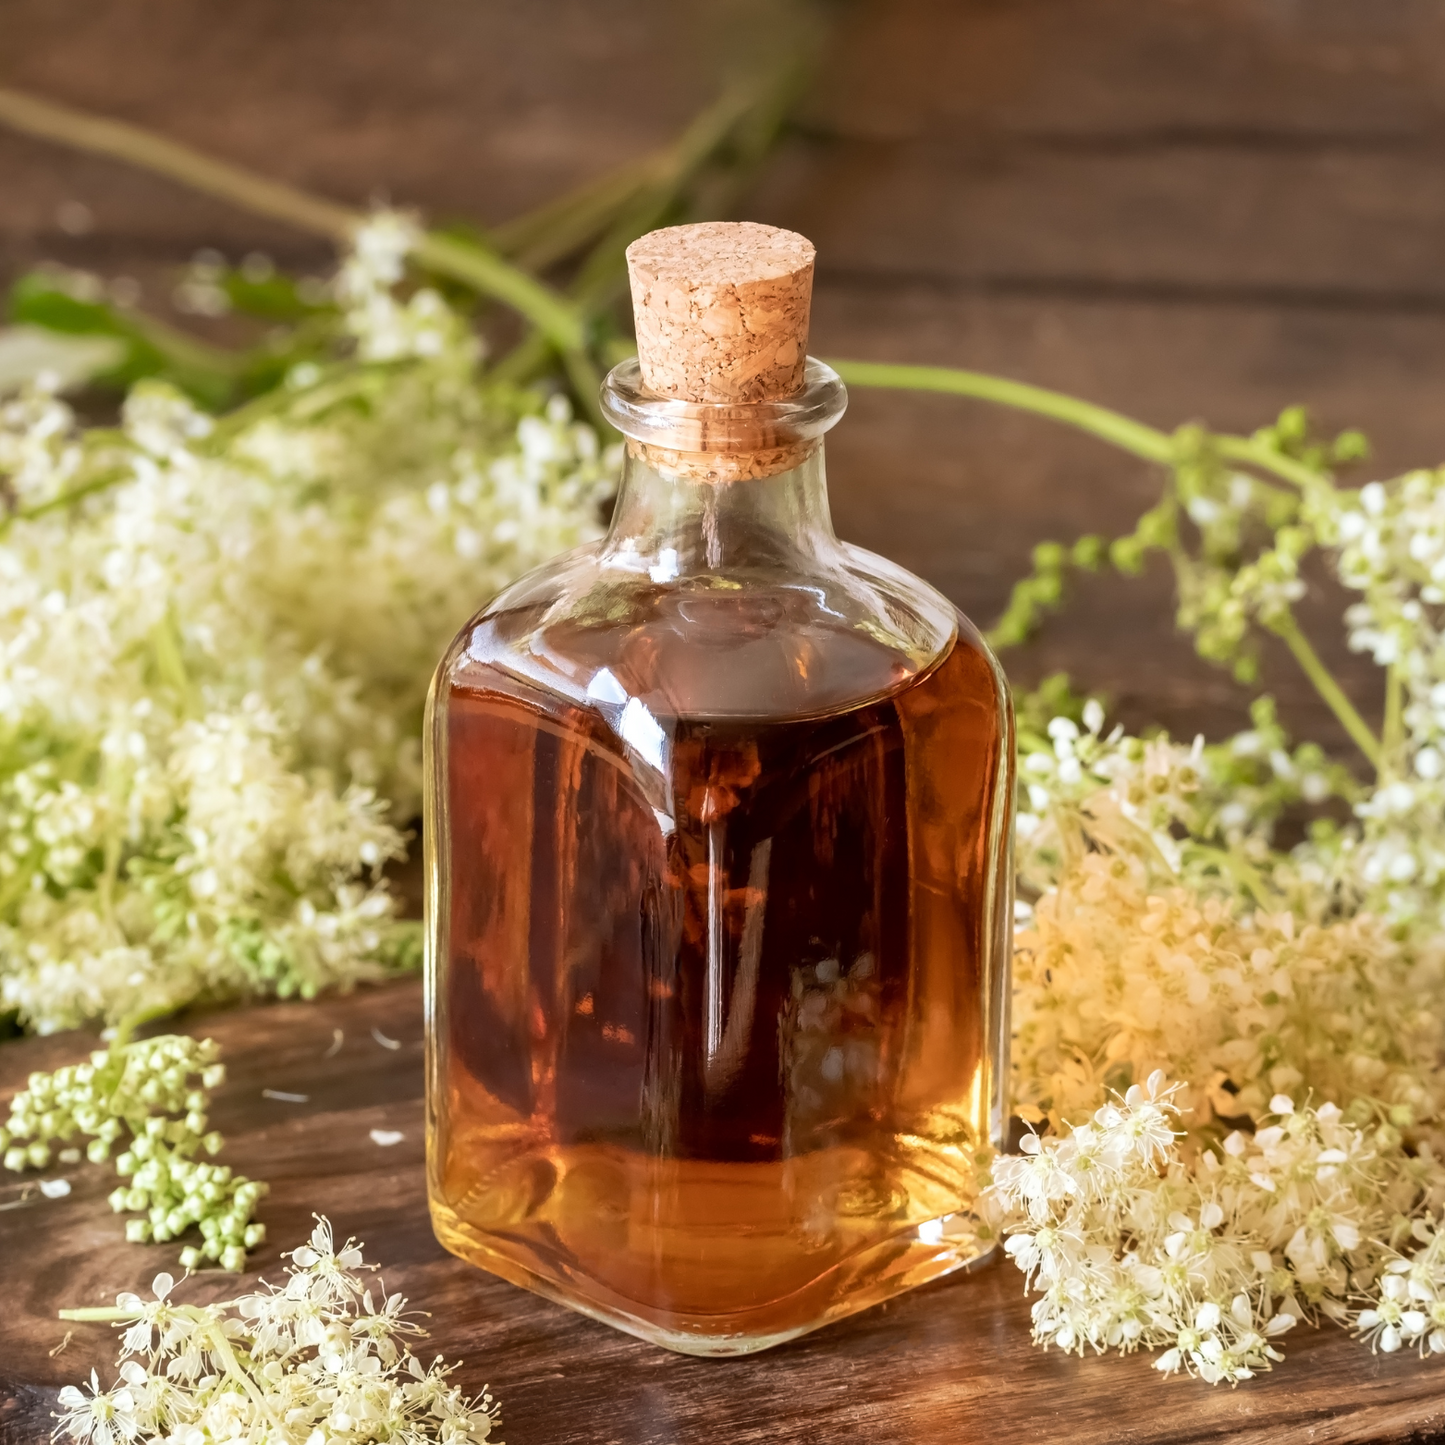 Meadowsweet Herb Symbolizes Healing, Peace, Mind and Body